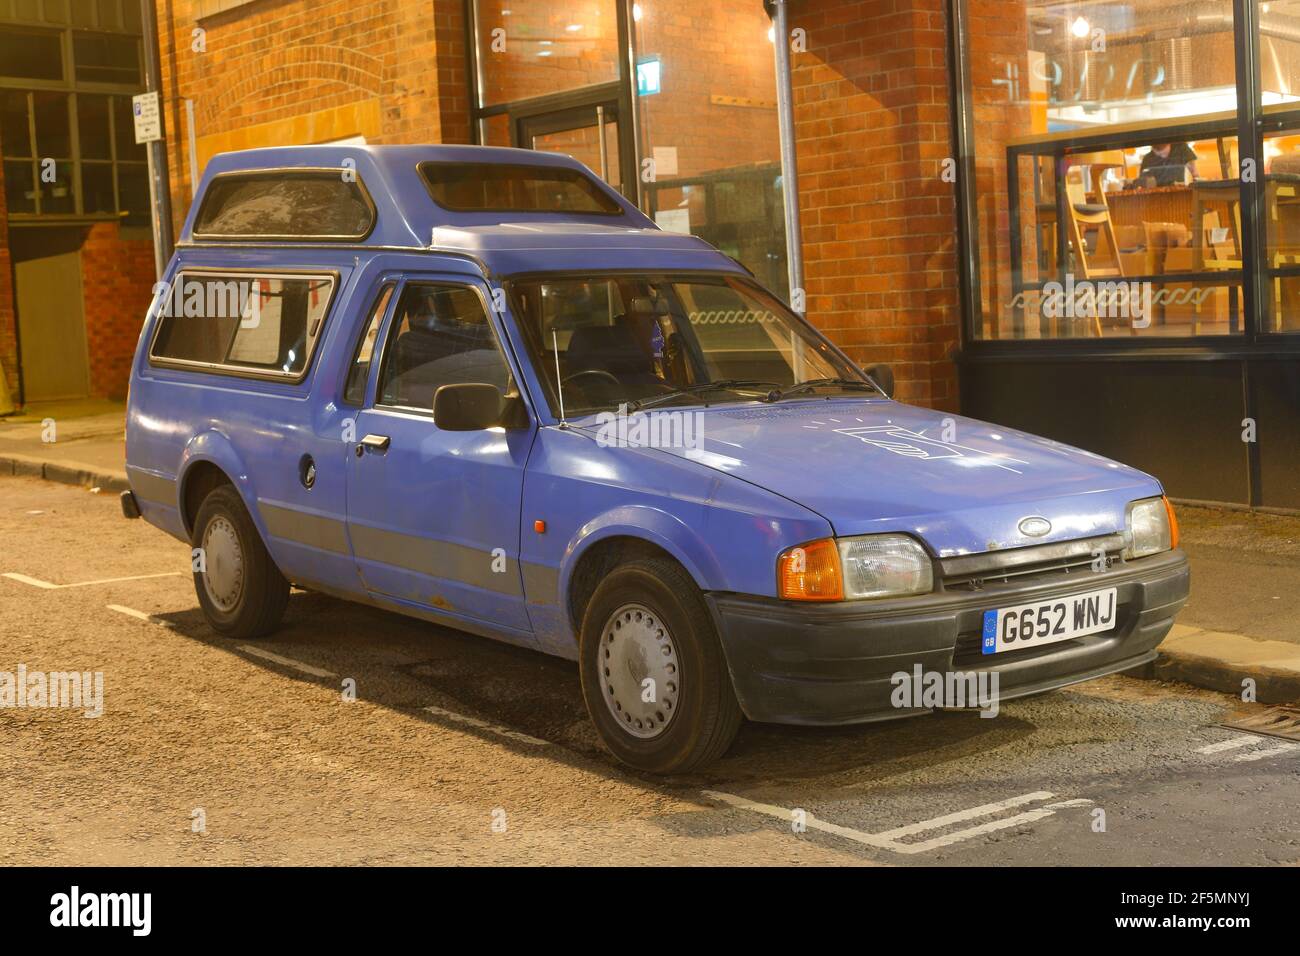 1999 Ford Escort Chairman with Gowrings adapted for wheelchairs. Seen here parked in Leeds City Centre. Stock Photo